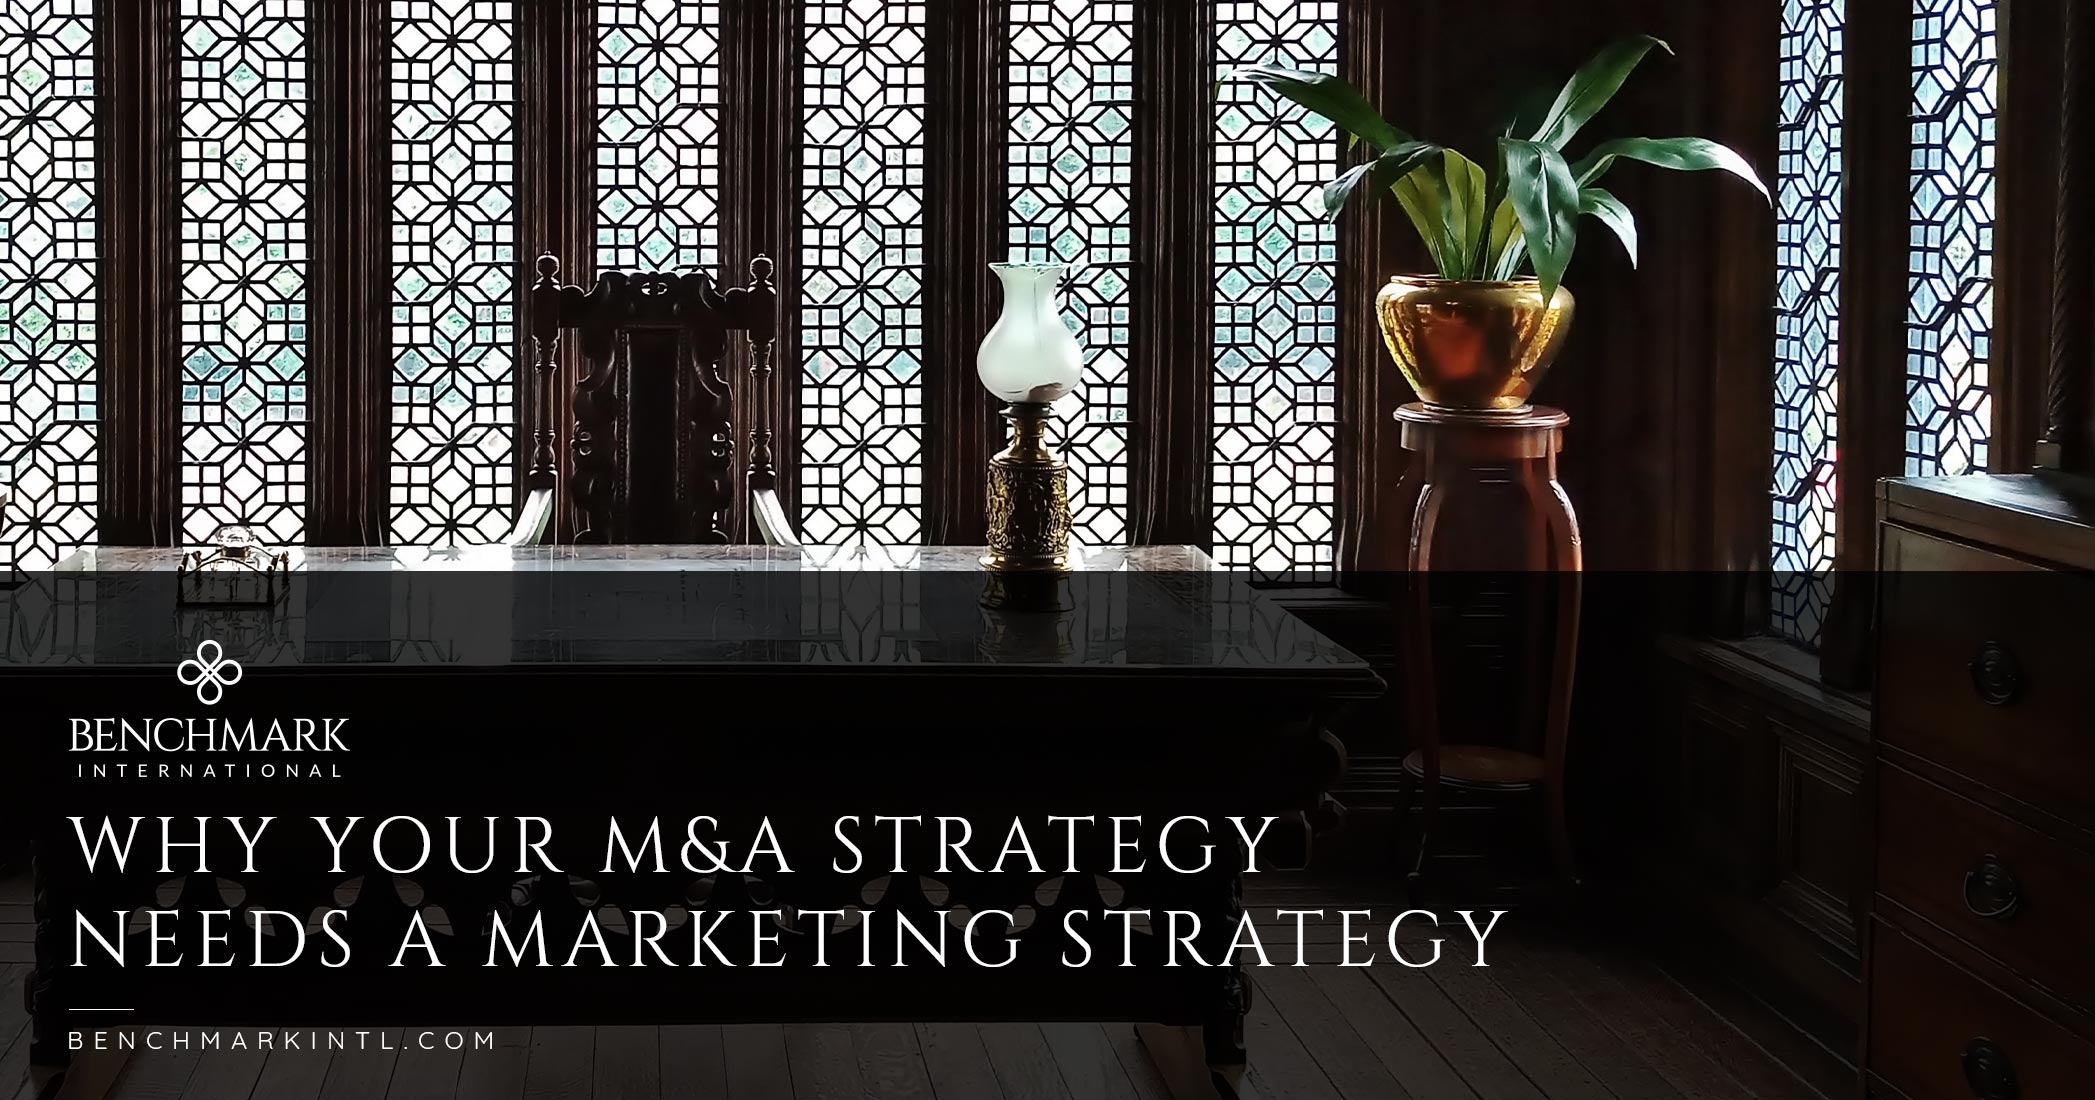 Why Your M&A Strategy Needs A Marketing Strategy